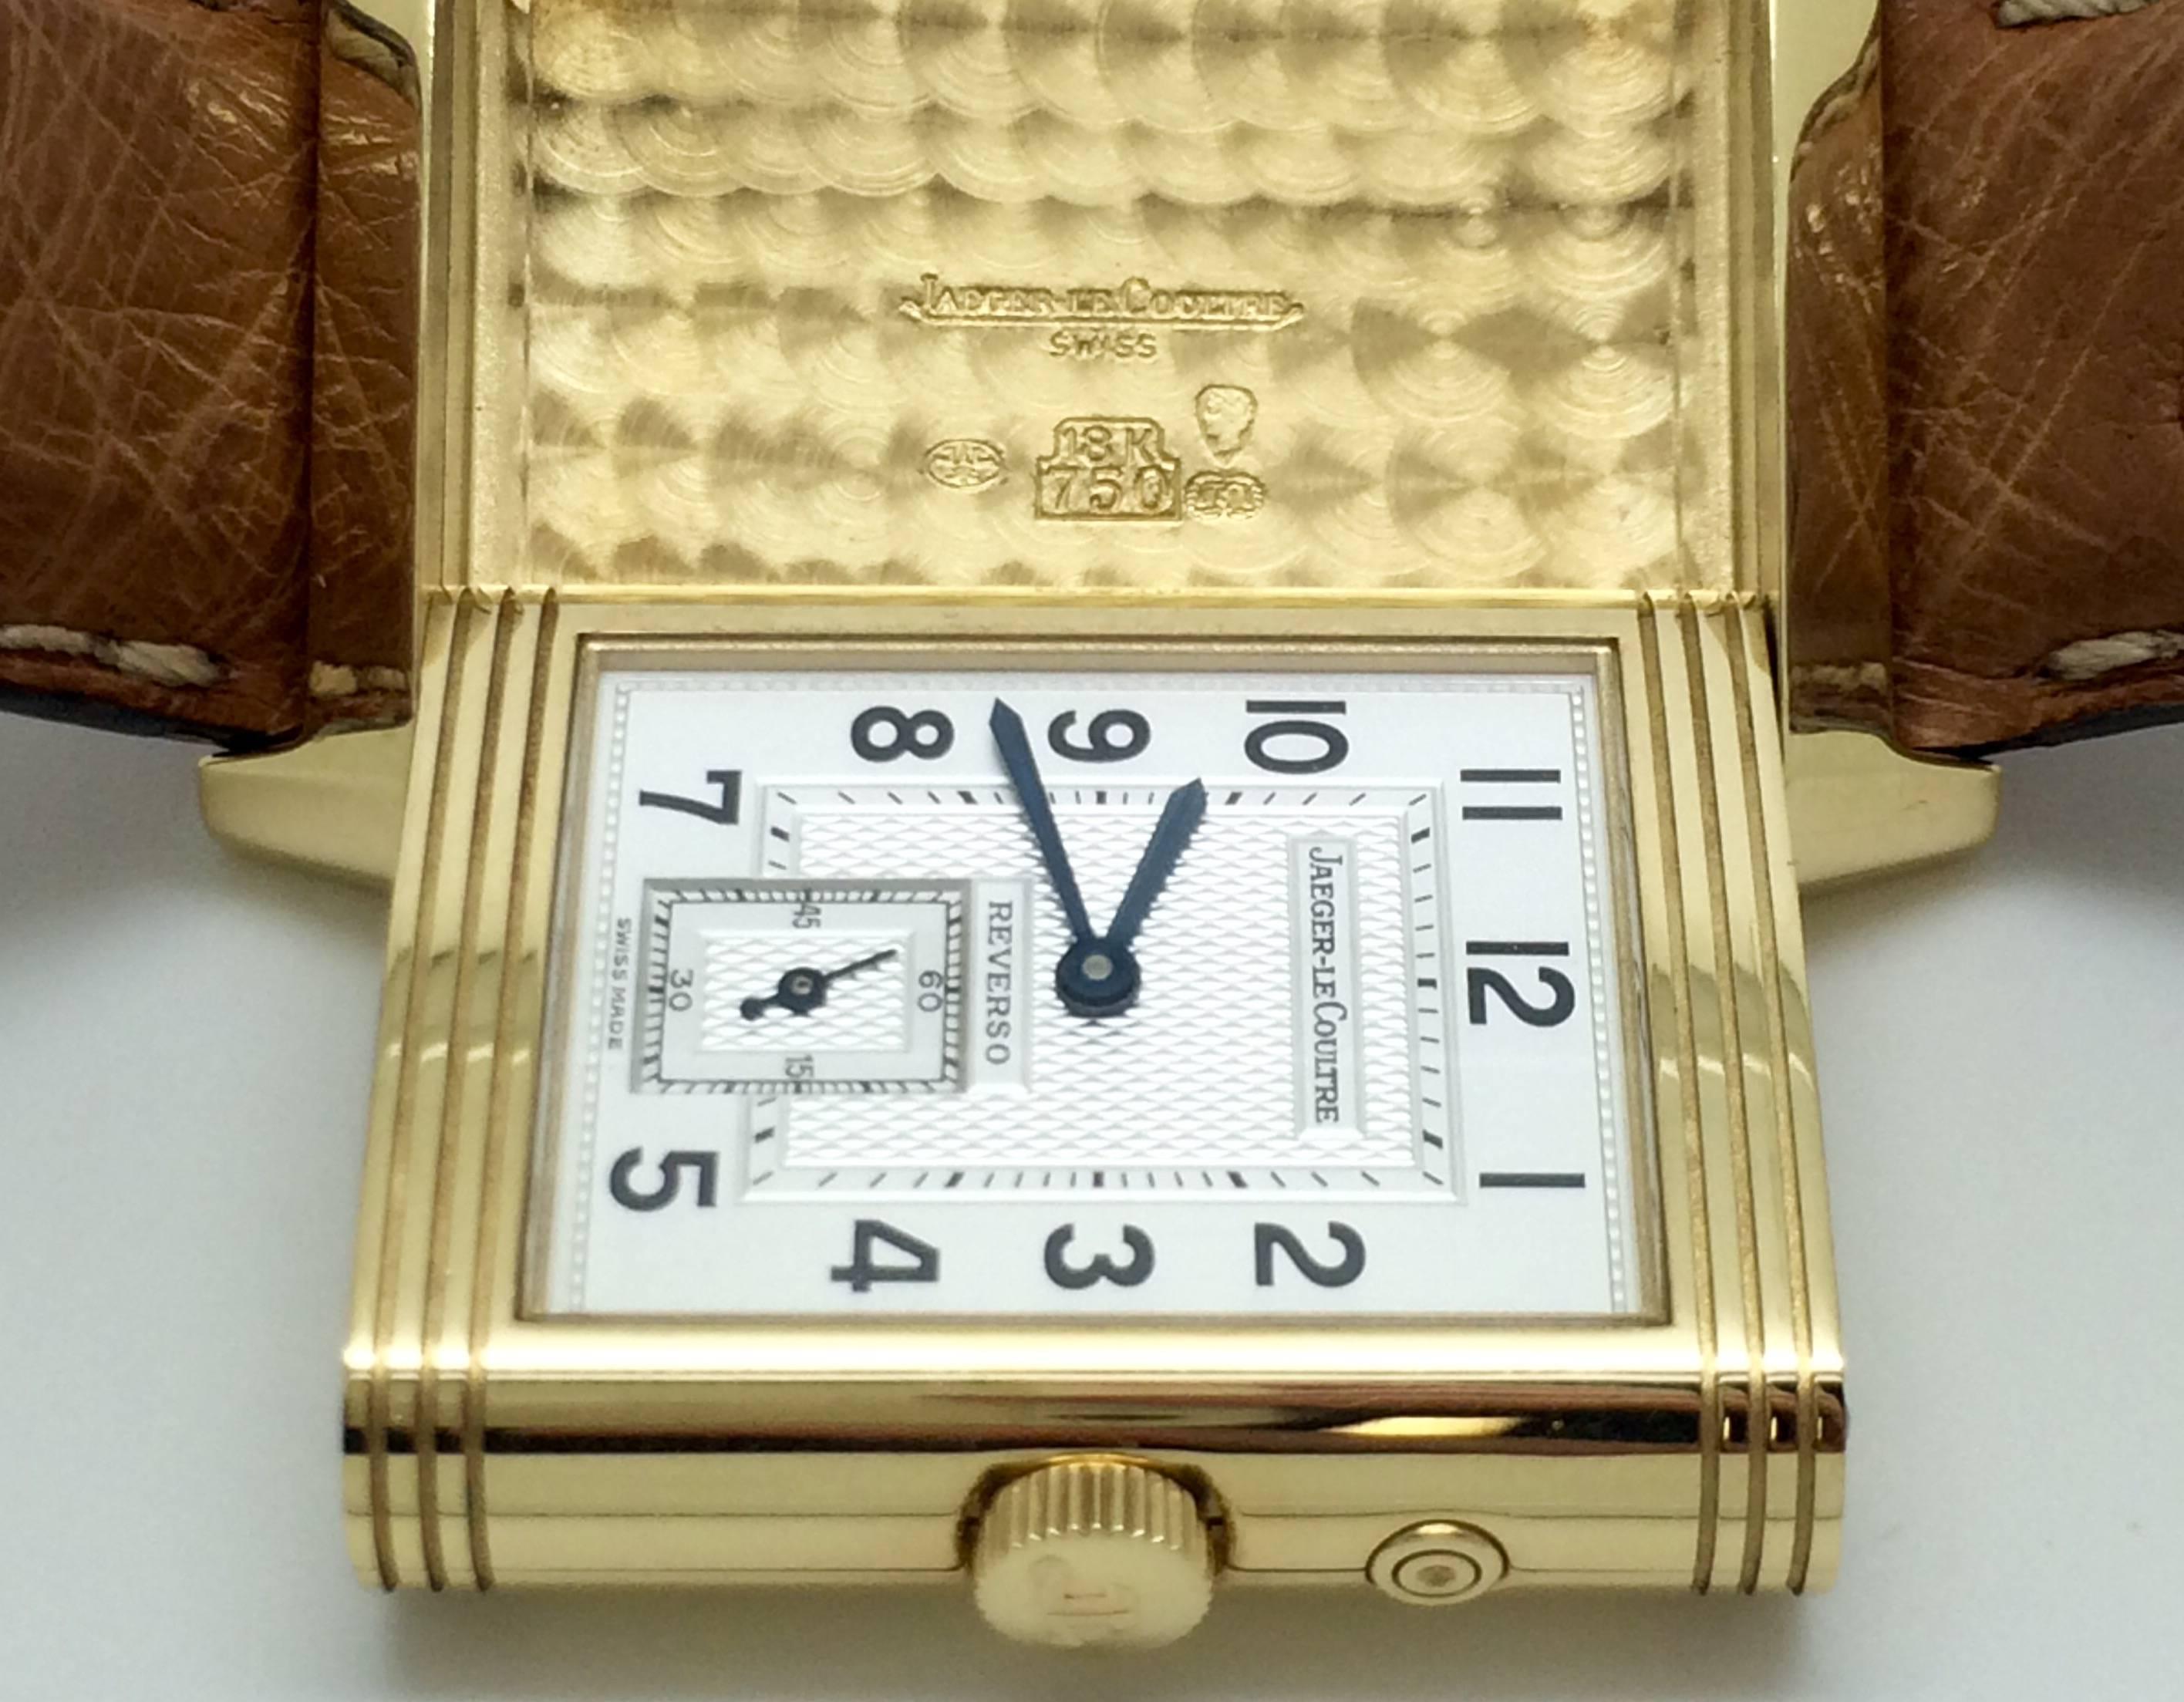 Jaeger-LeCoultre Reverso Duo Face Day & Night 18kt Yellow Gold Wristwatch Ref# 270.1.54.  26mm width by 36mm length, manual winding, 18kt yellow gold case, Ostrich skin strap,  Serial 1743218. A pre-owned watch.